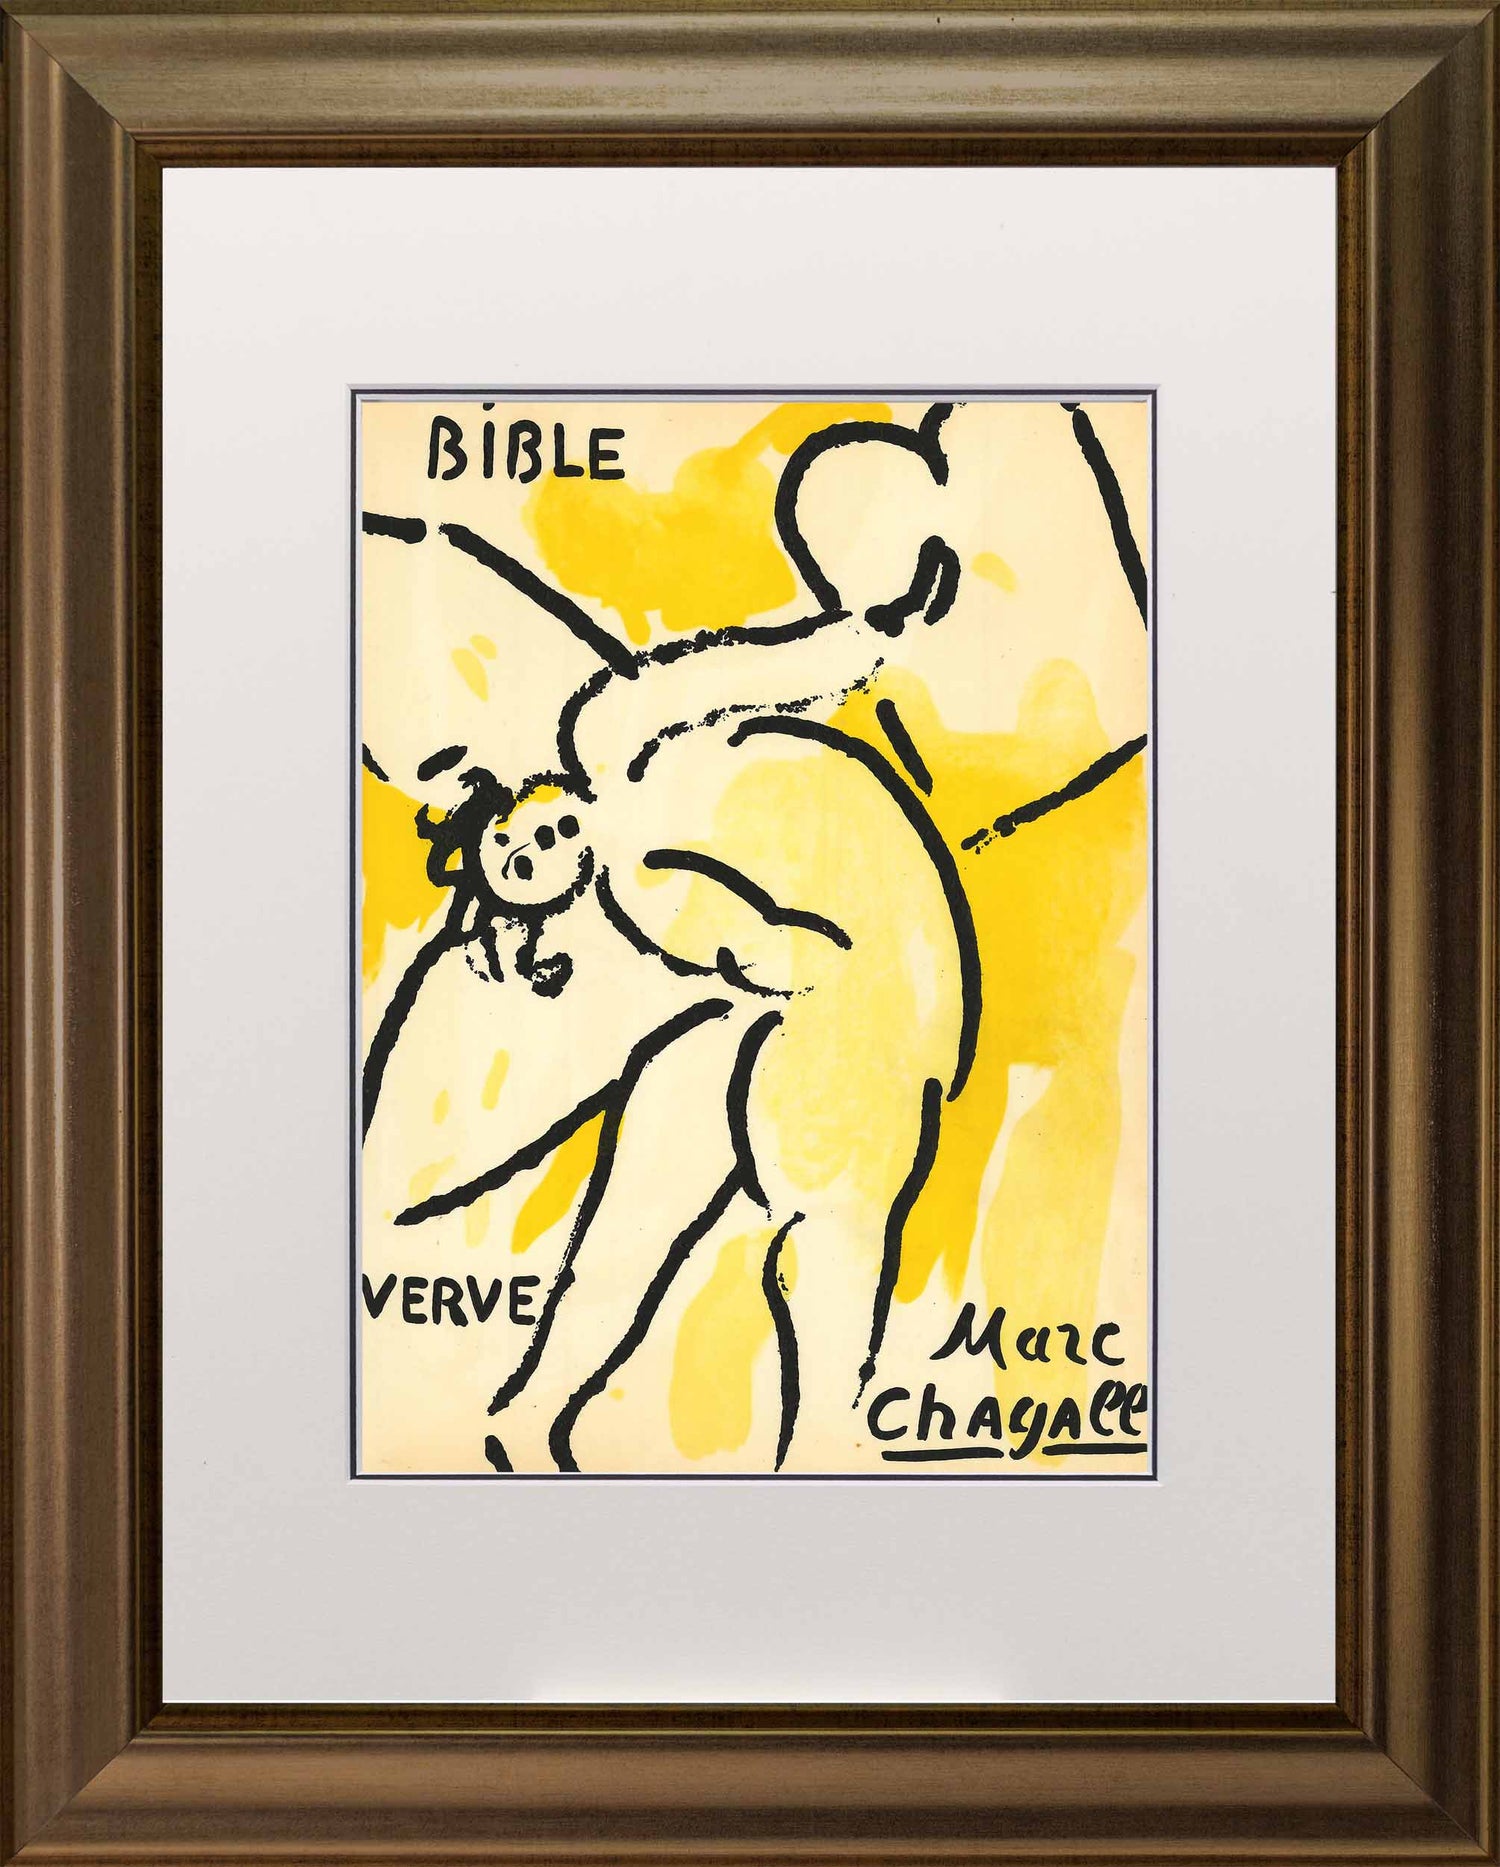 Marc Chagall; Cover lithograph Verve - The Bible frame